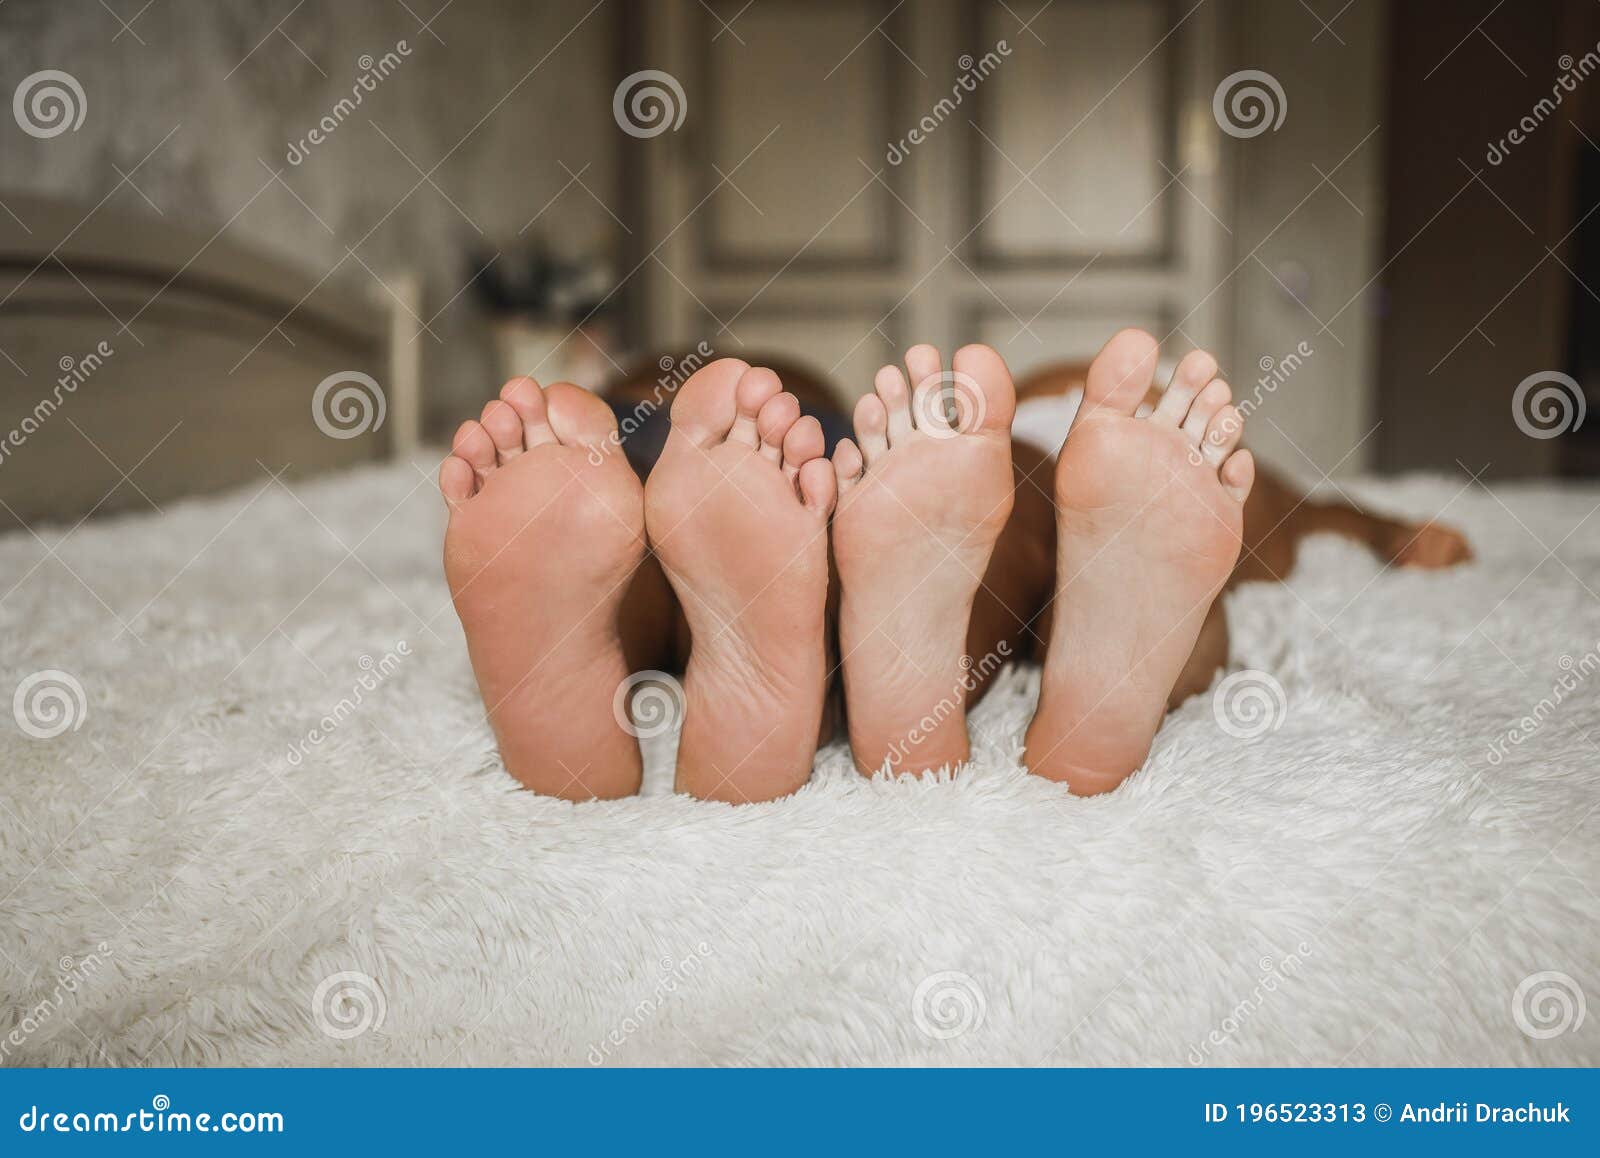 Adult Man And A Woman With Bare Feet Are Lying On The Bed Stock Image Image Of Beautiful Friends 196523313